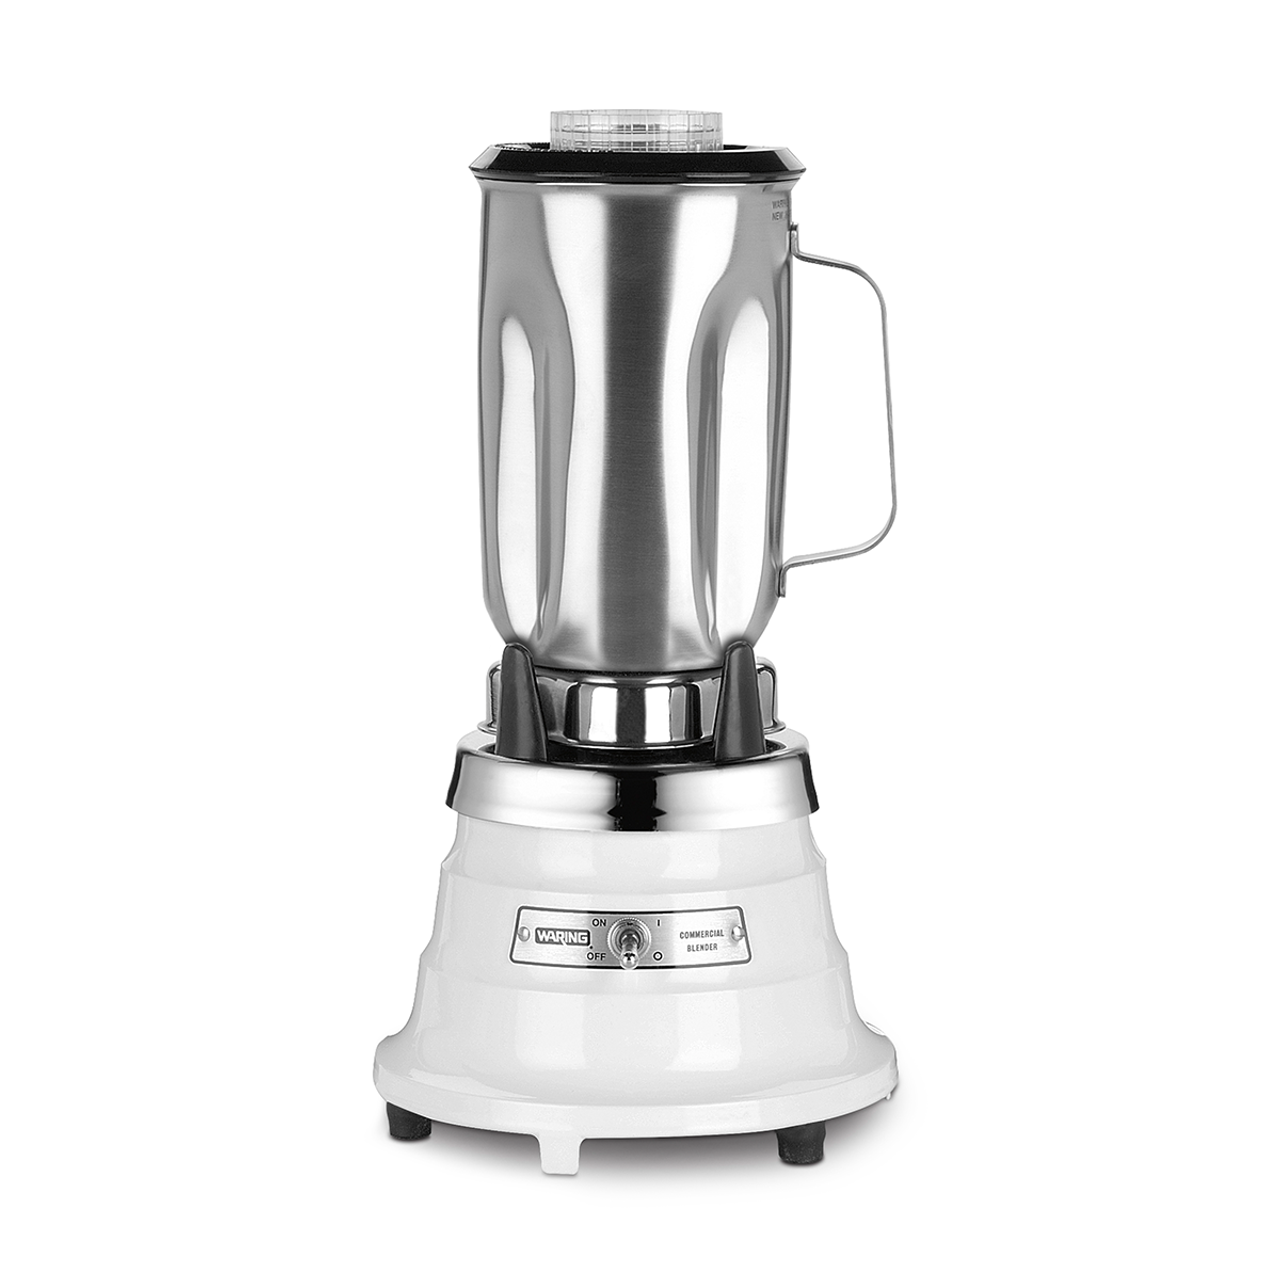 WARING 700S 1Lt Single-Speed Blender with Stainless Steel Container, 120V -  S5180-1 - General Laboratory Supply